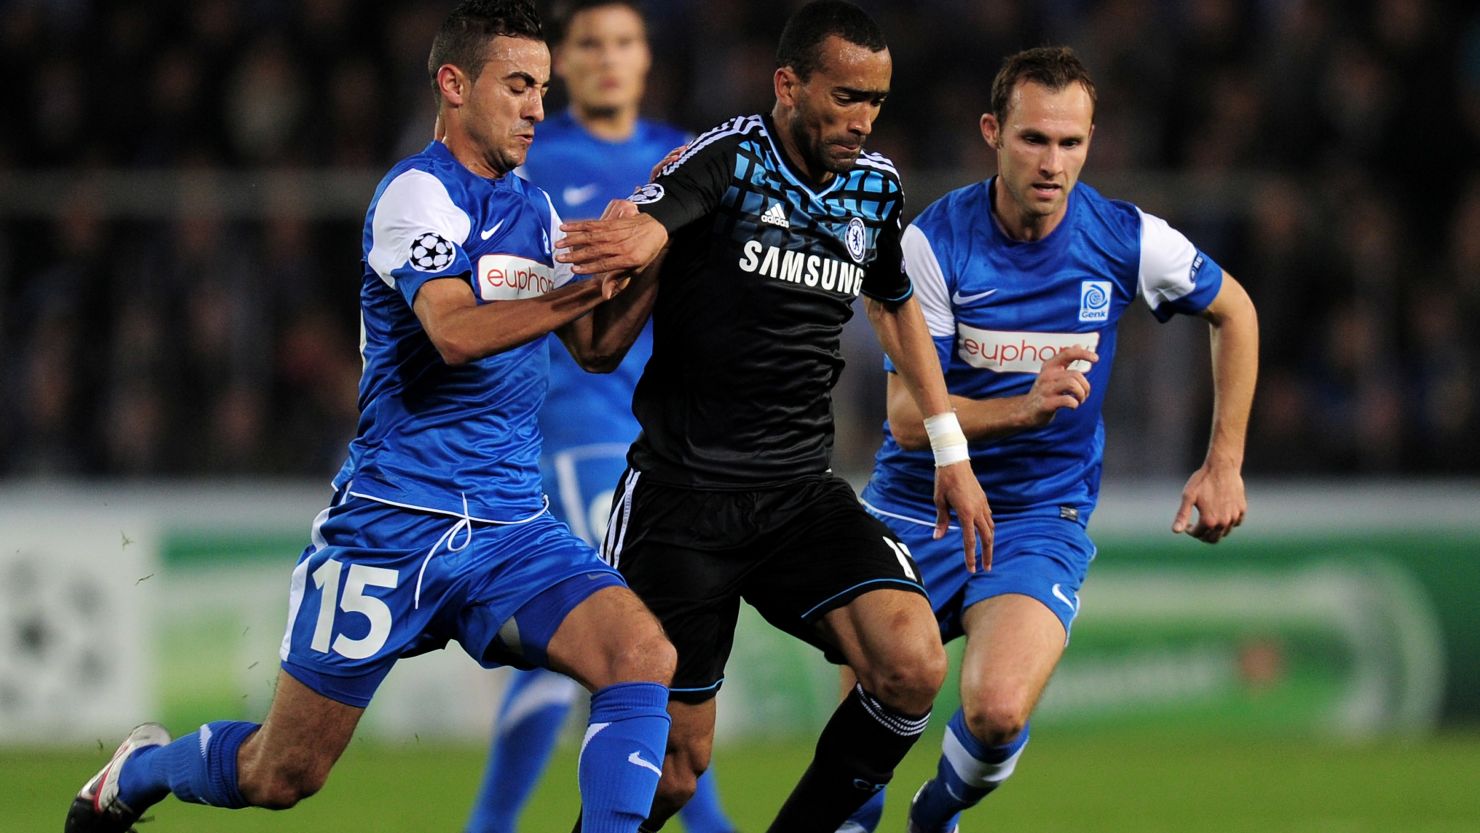 John Terry was an unused substitute as Chelsea drew 1-1 away to Genk in the Champions League.